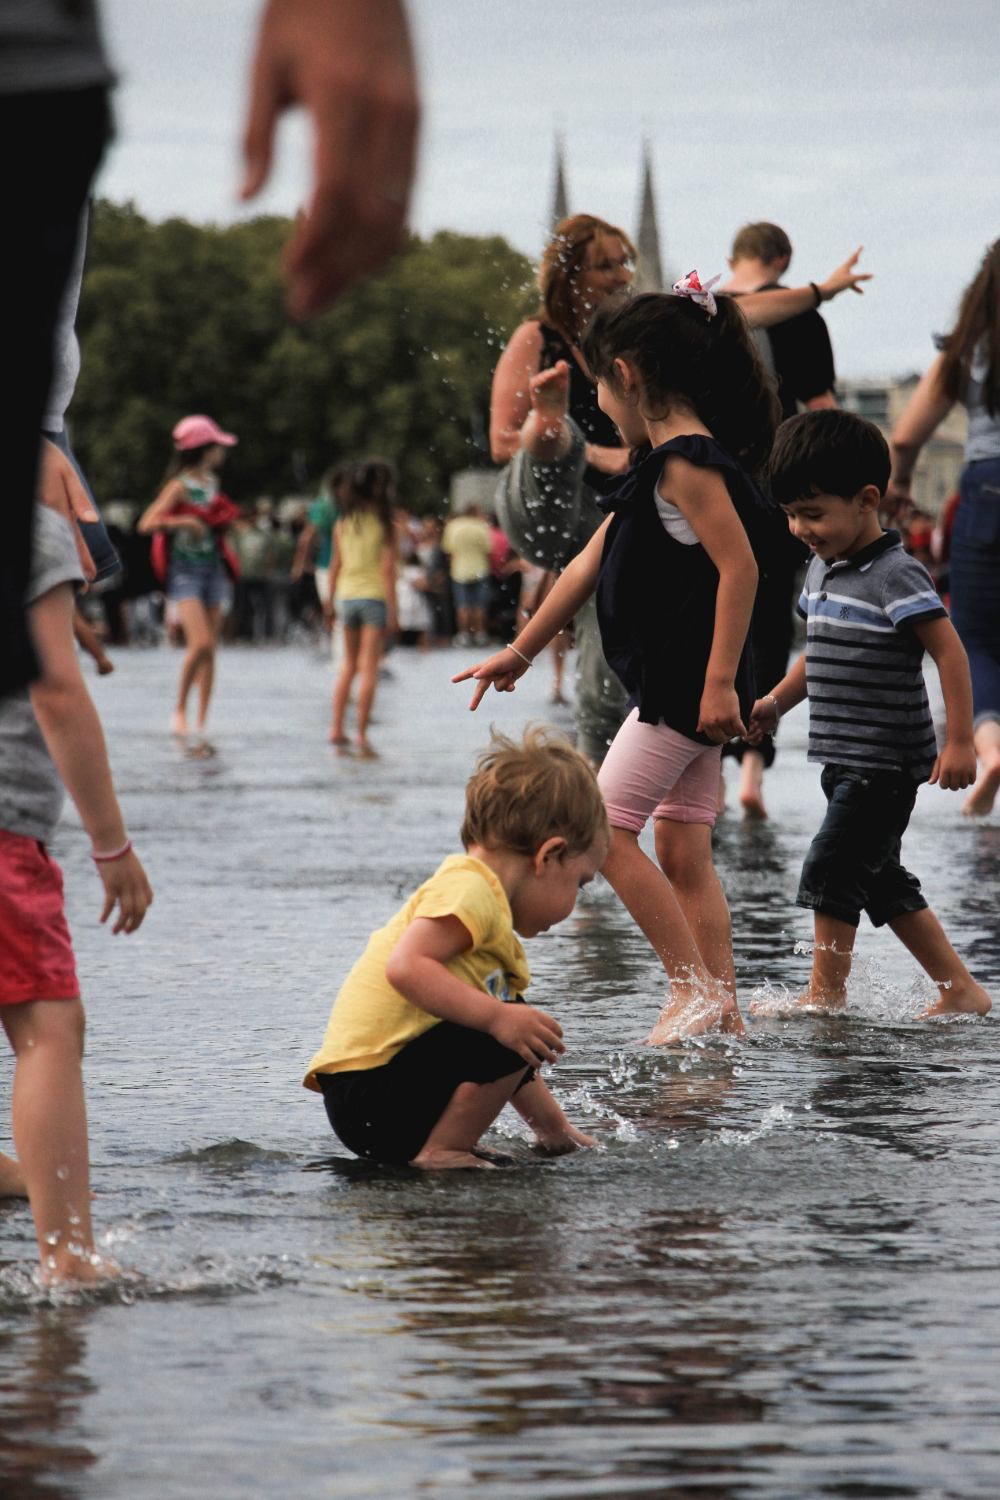 A toddler, crouched down and splashing his hand in shallow water while other children happily wet their feet and stroll around